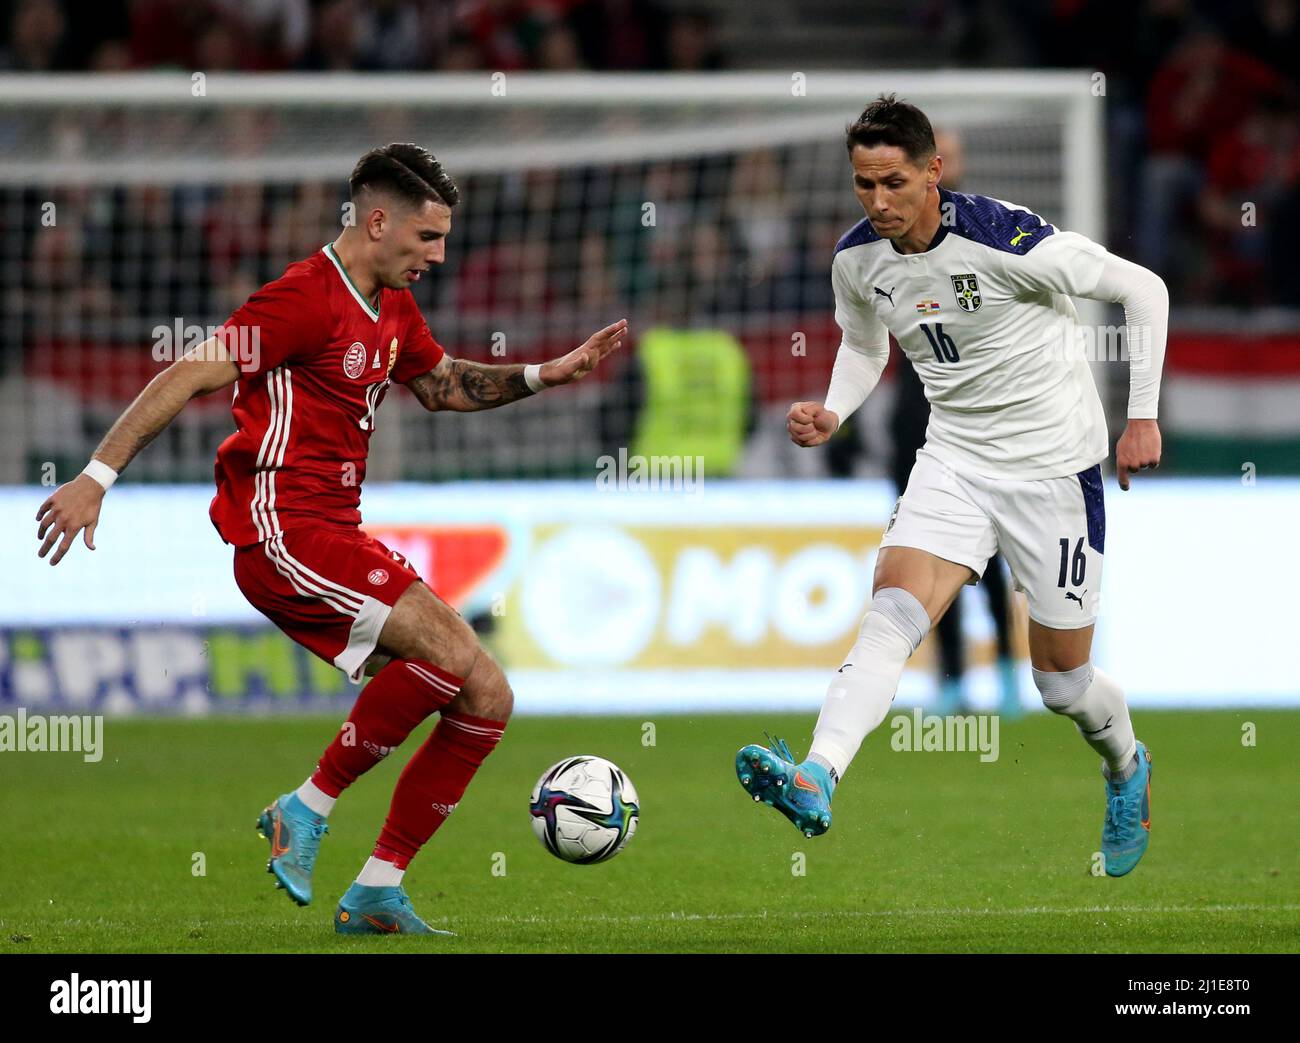 BUDAPEST, HUNGARY - MARCH 24: Sasa Lukic of Serbia competes for the ball with Roland Sallai of Hungary ,during the international friendly match between Hungary and Serbia at Puskas Arena on March 24, 2022 in Budapest, Hungary. (Photo by MB Media) Stock Photo